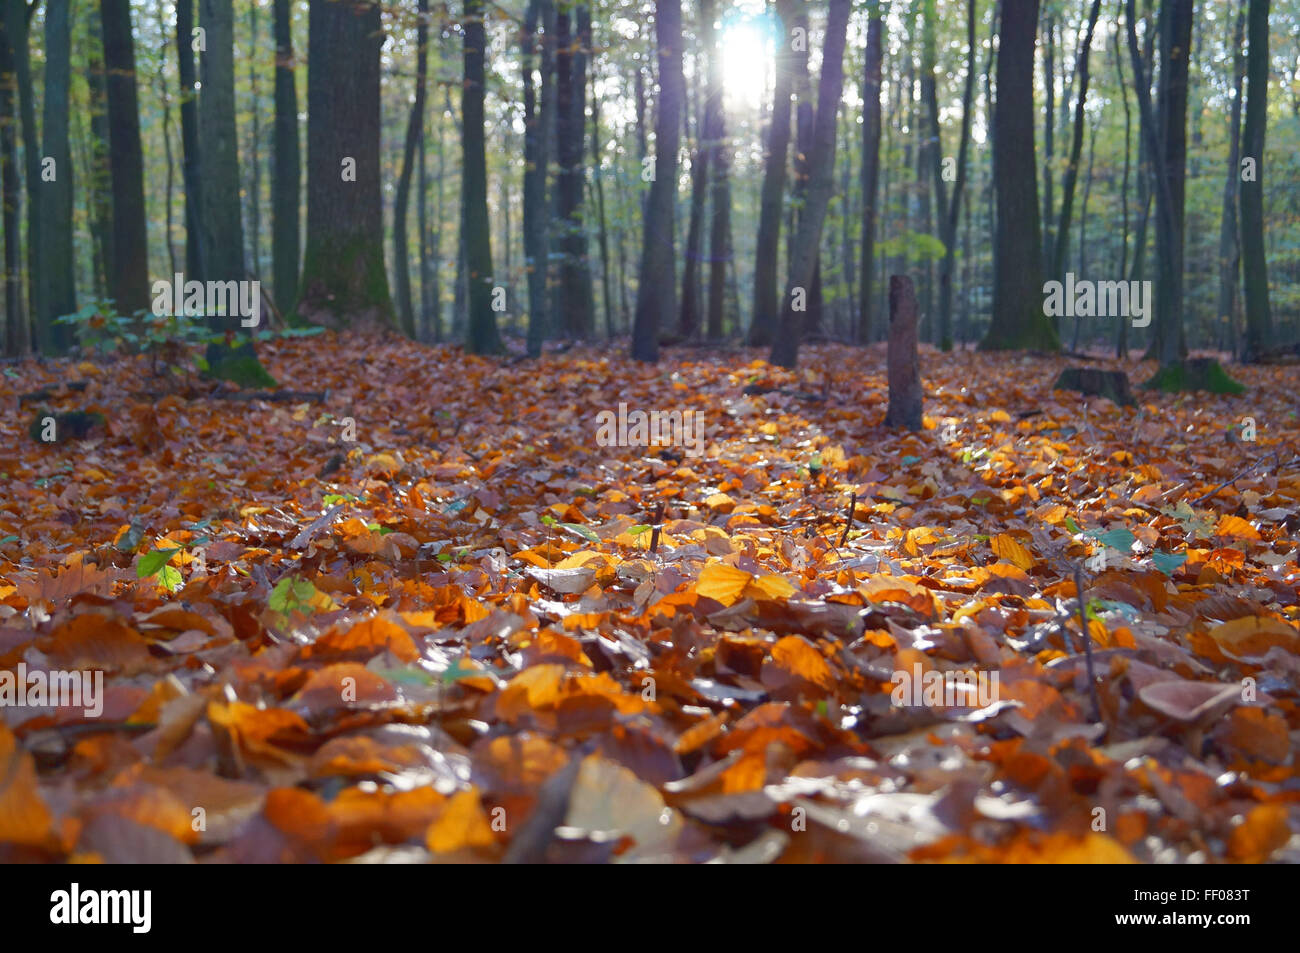 Fallen Leaves in a Forest Fallen Leaves in a Forest Stock Photo